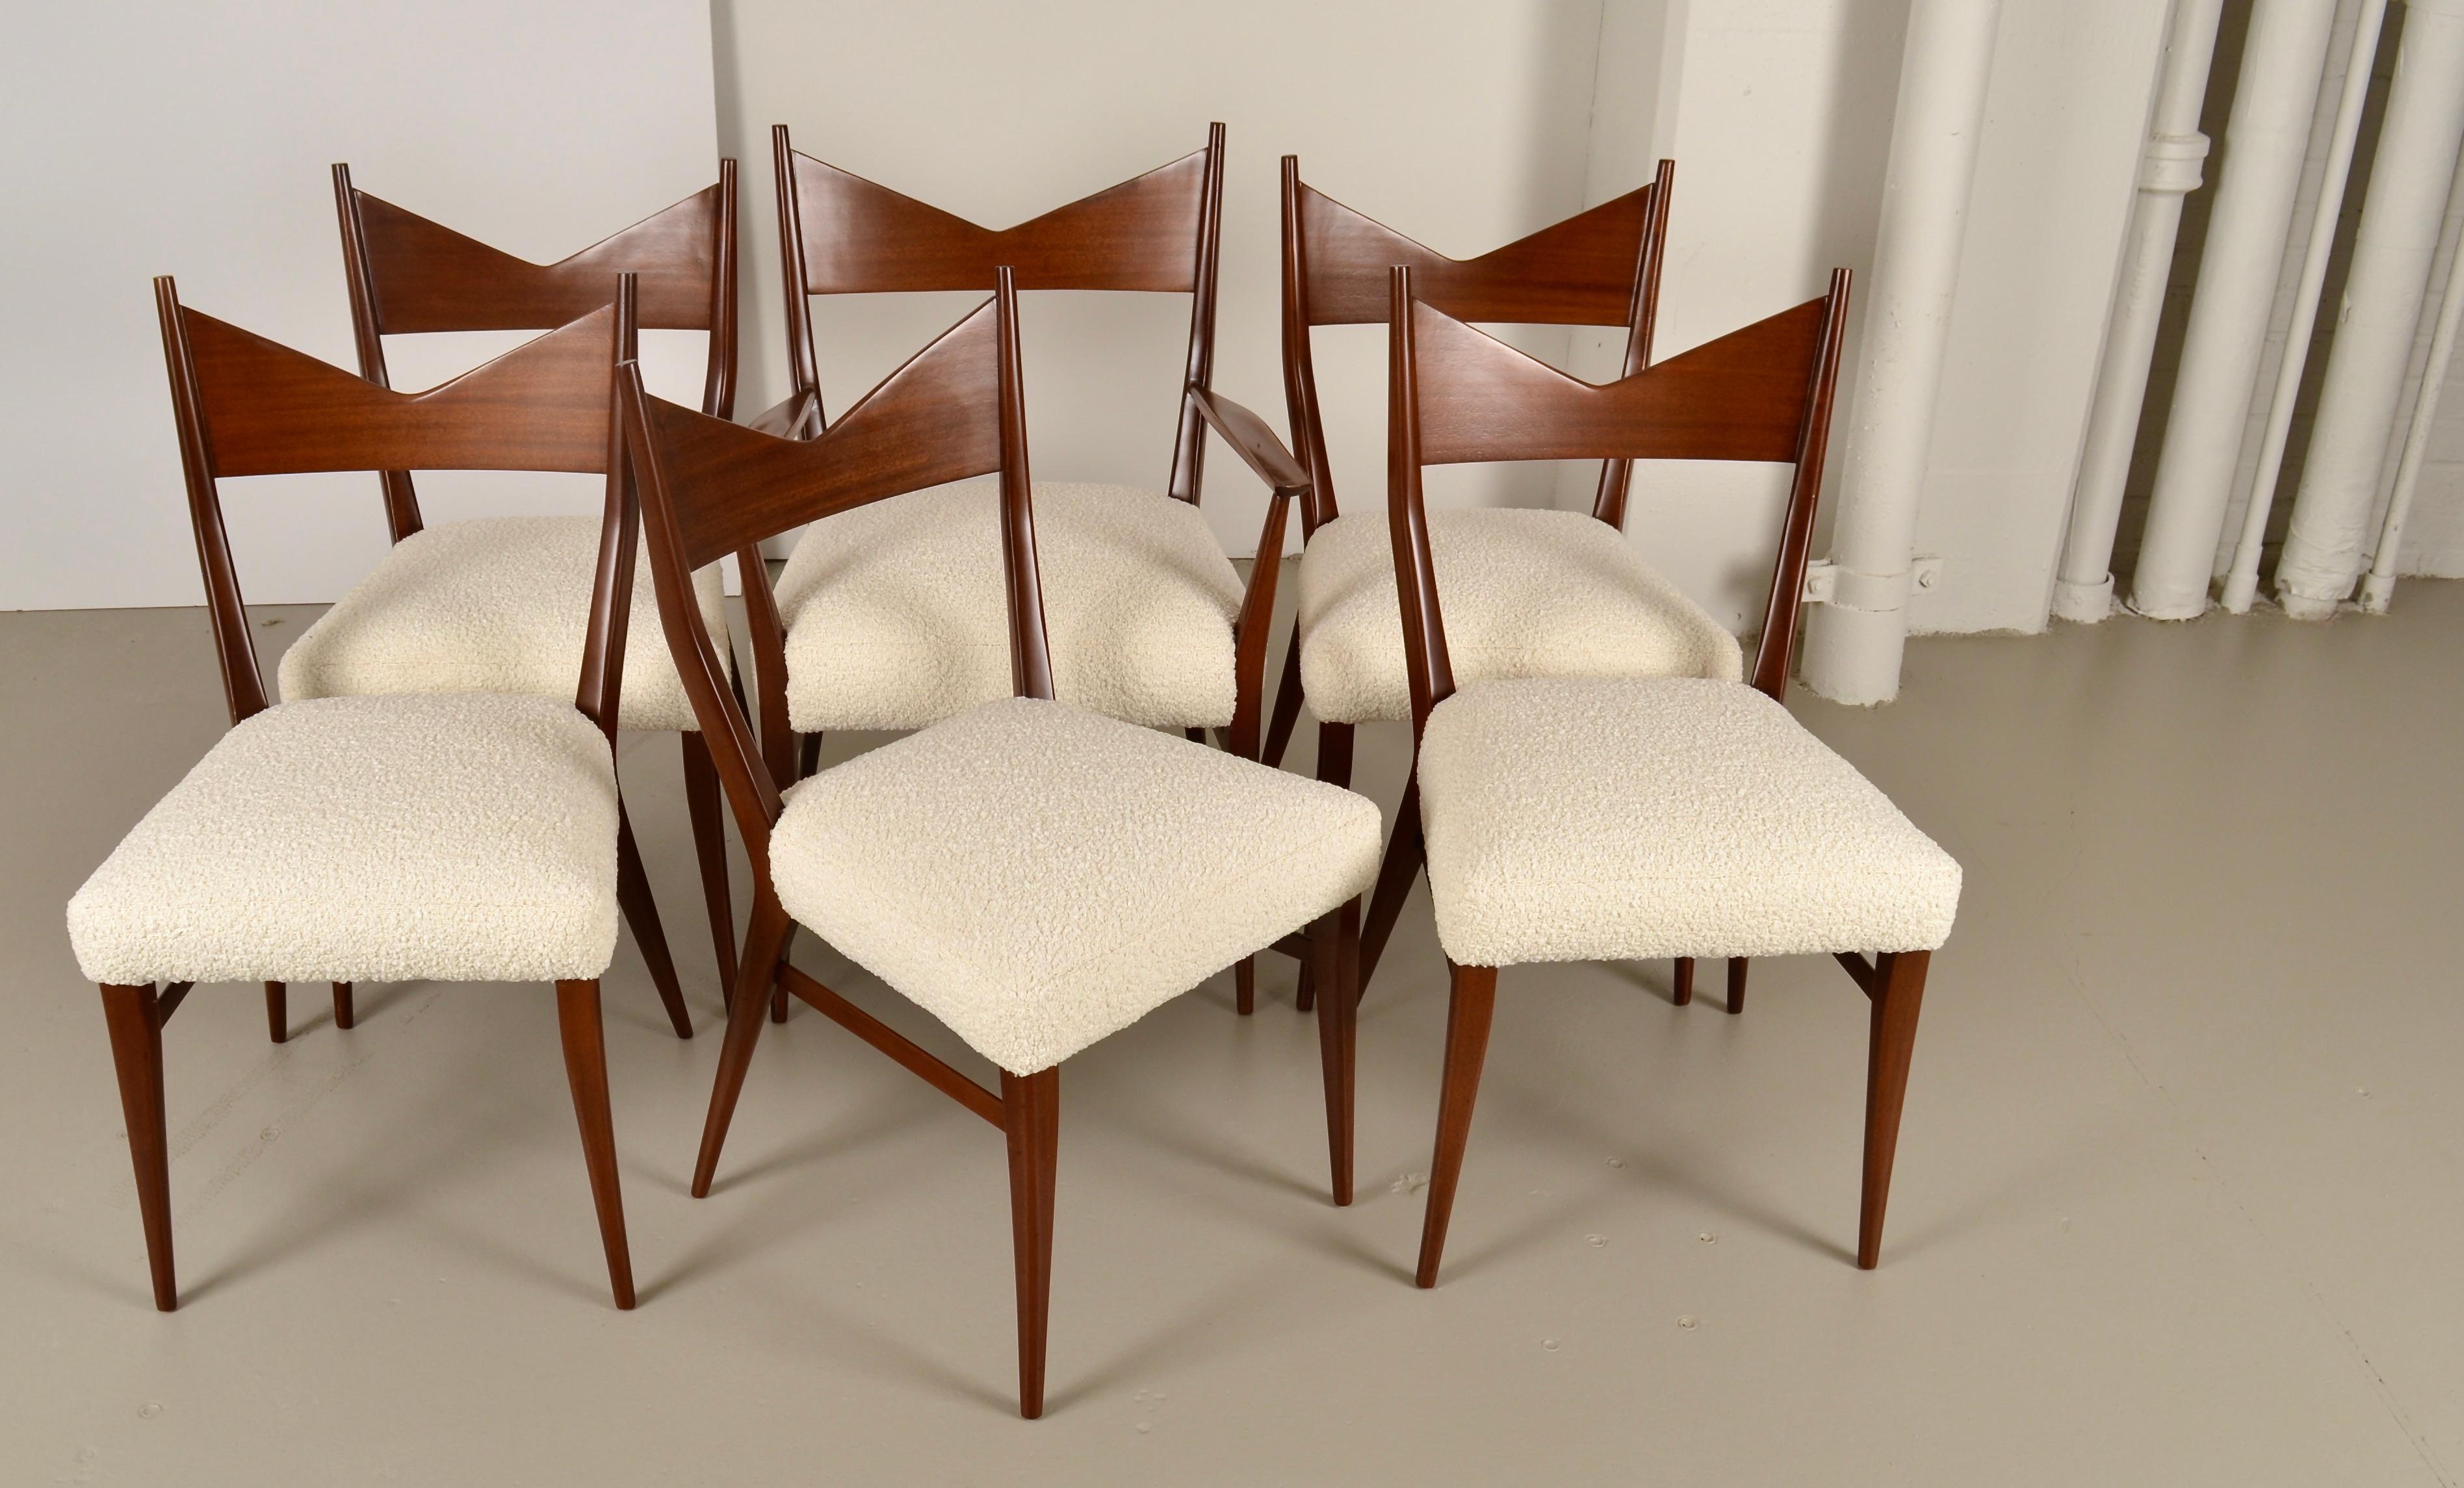 Classic dining chairs designed by Paul McCobb for Calvin Furniture, in the 1950s. This set has been comprehensively restored. The walnut frames have been refinished in a warm brown stain, satin lacquer finish. All new upholstery in luxurious wool